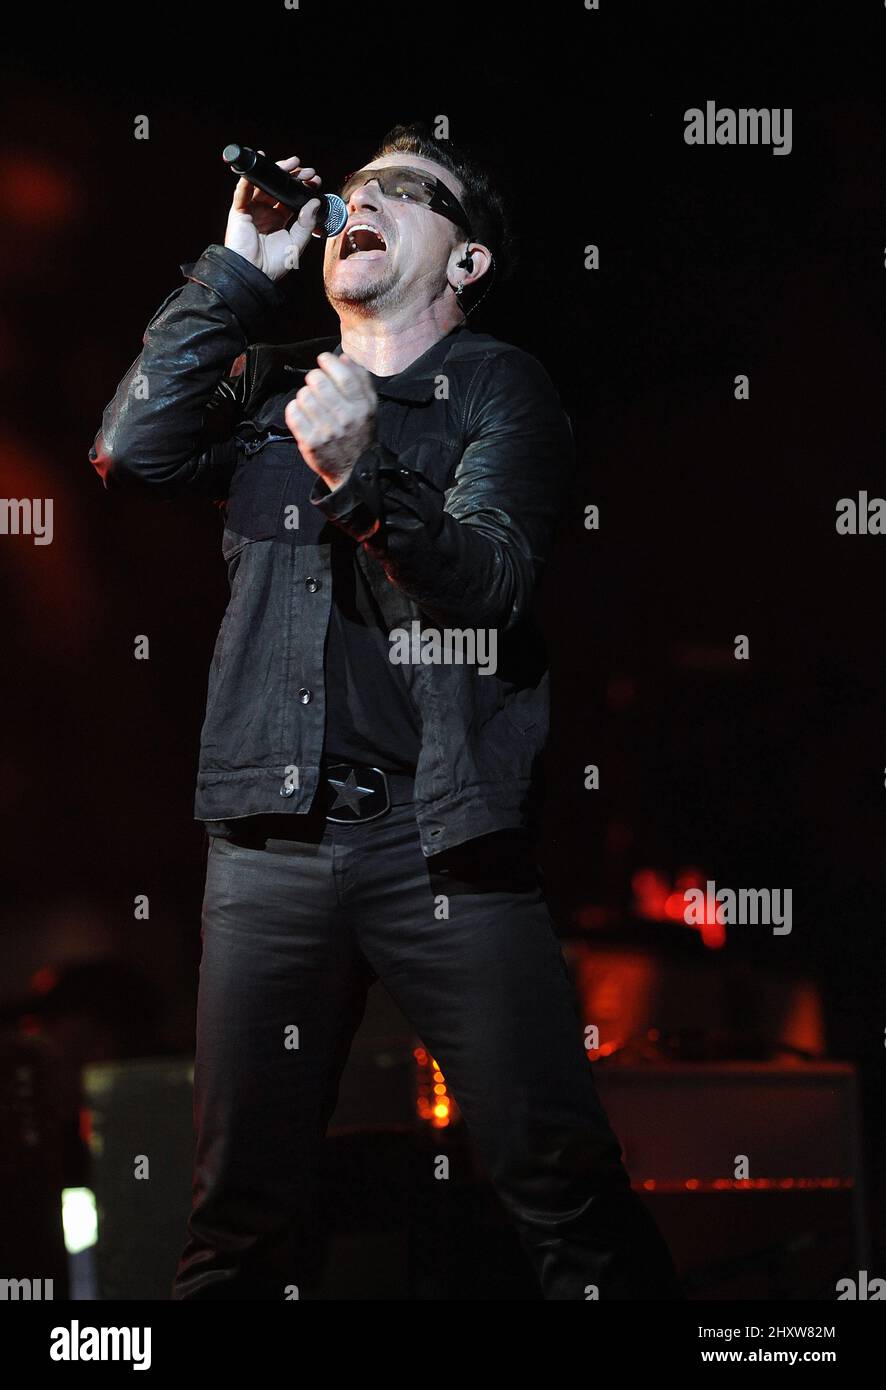 Bono of the band U2 performs live in concert at the M & T Bank Stadium in Baltimore, Maryland, USA. Stock Photo